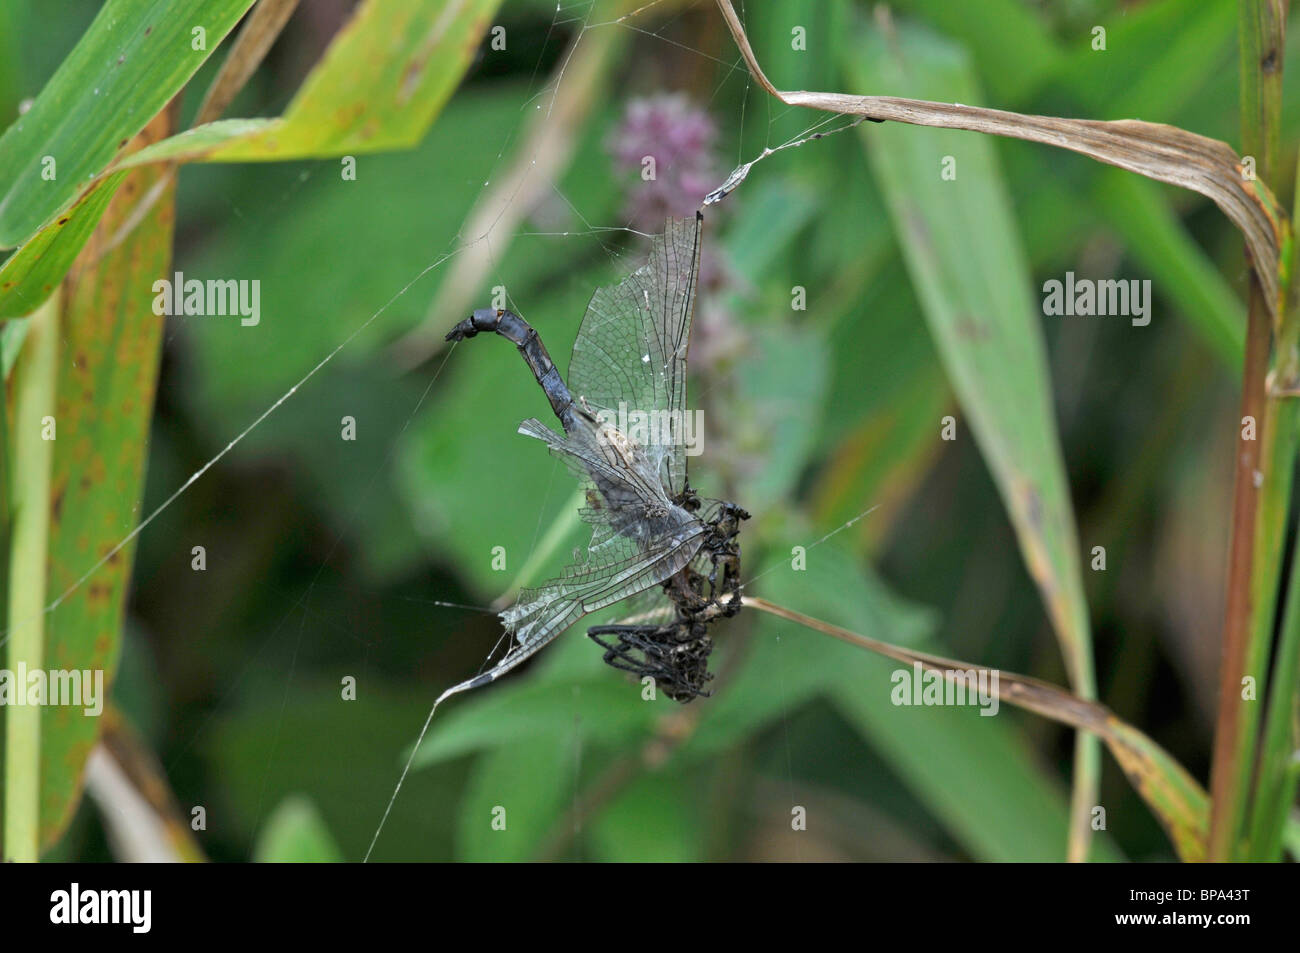 Dragonfly caught in spiders web Stock Photo